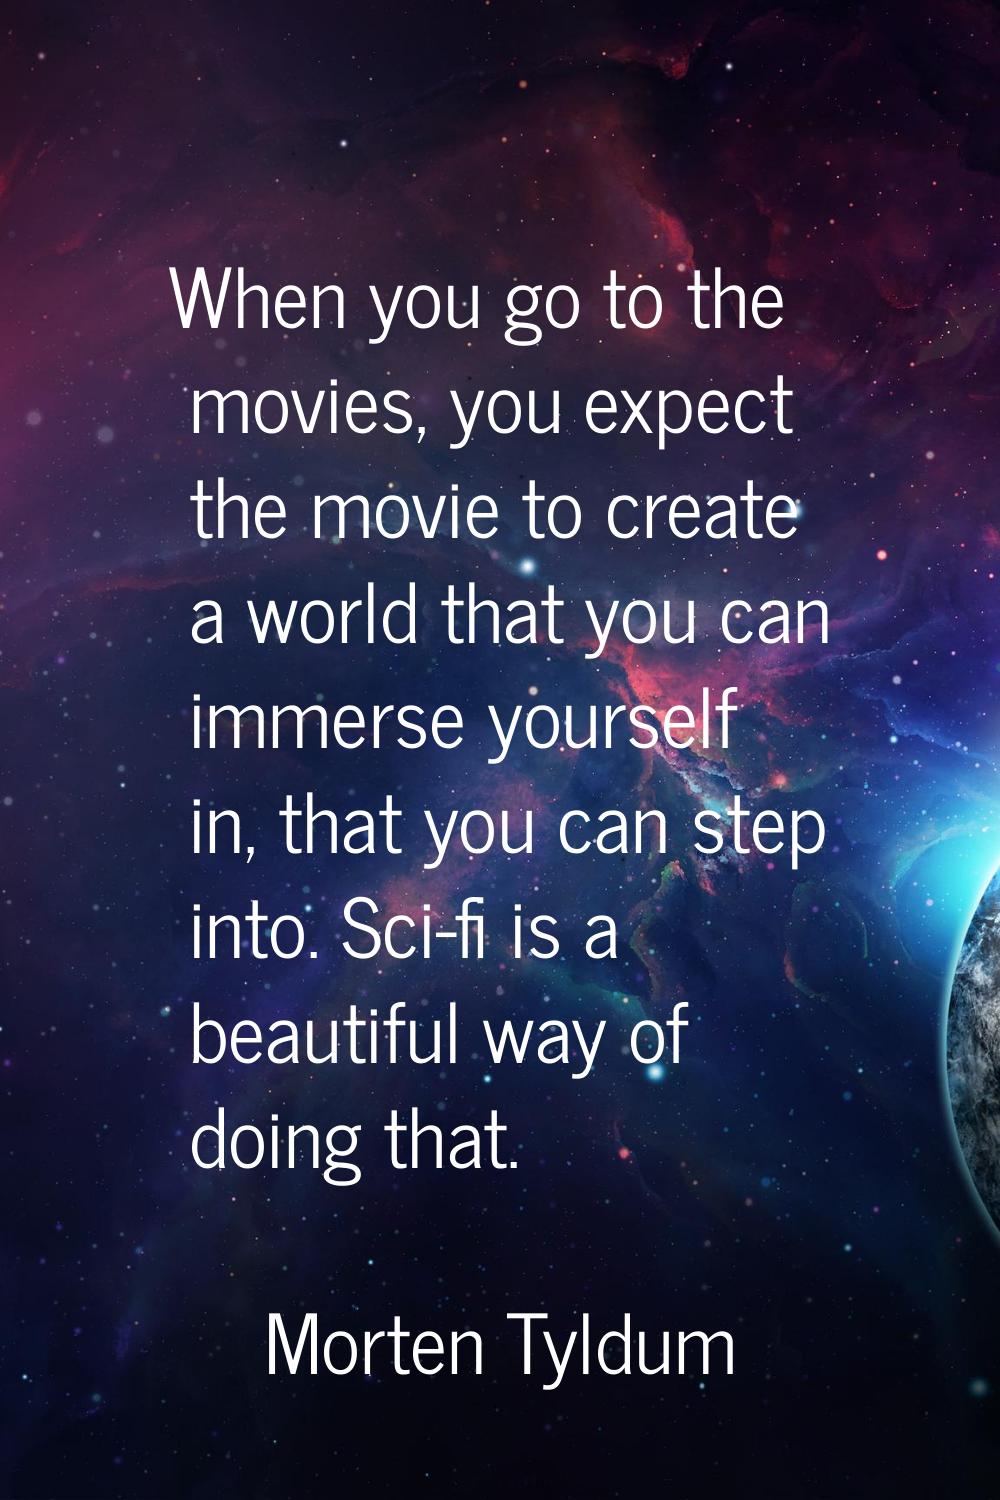 When you go to the movies, you expect the movie to create a world that you can immerse yourself in,